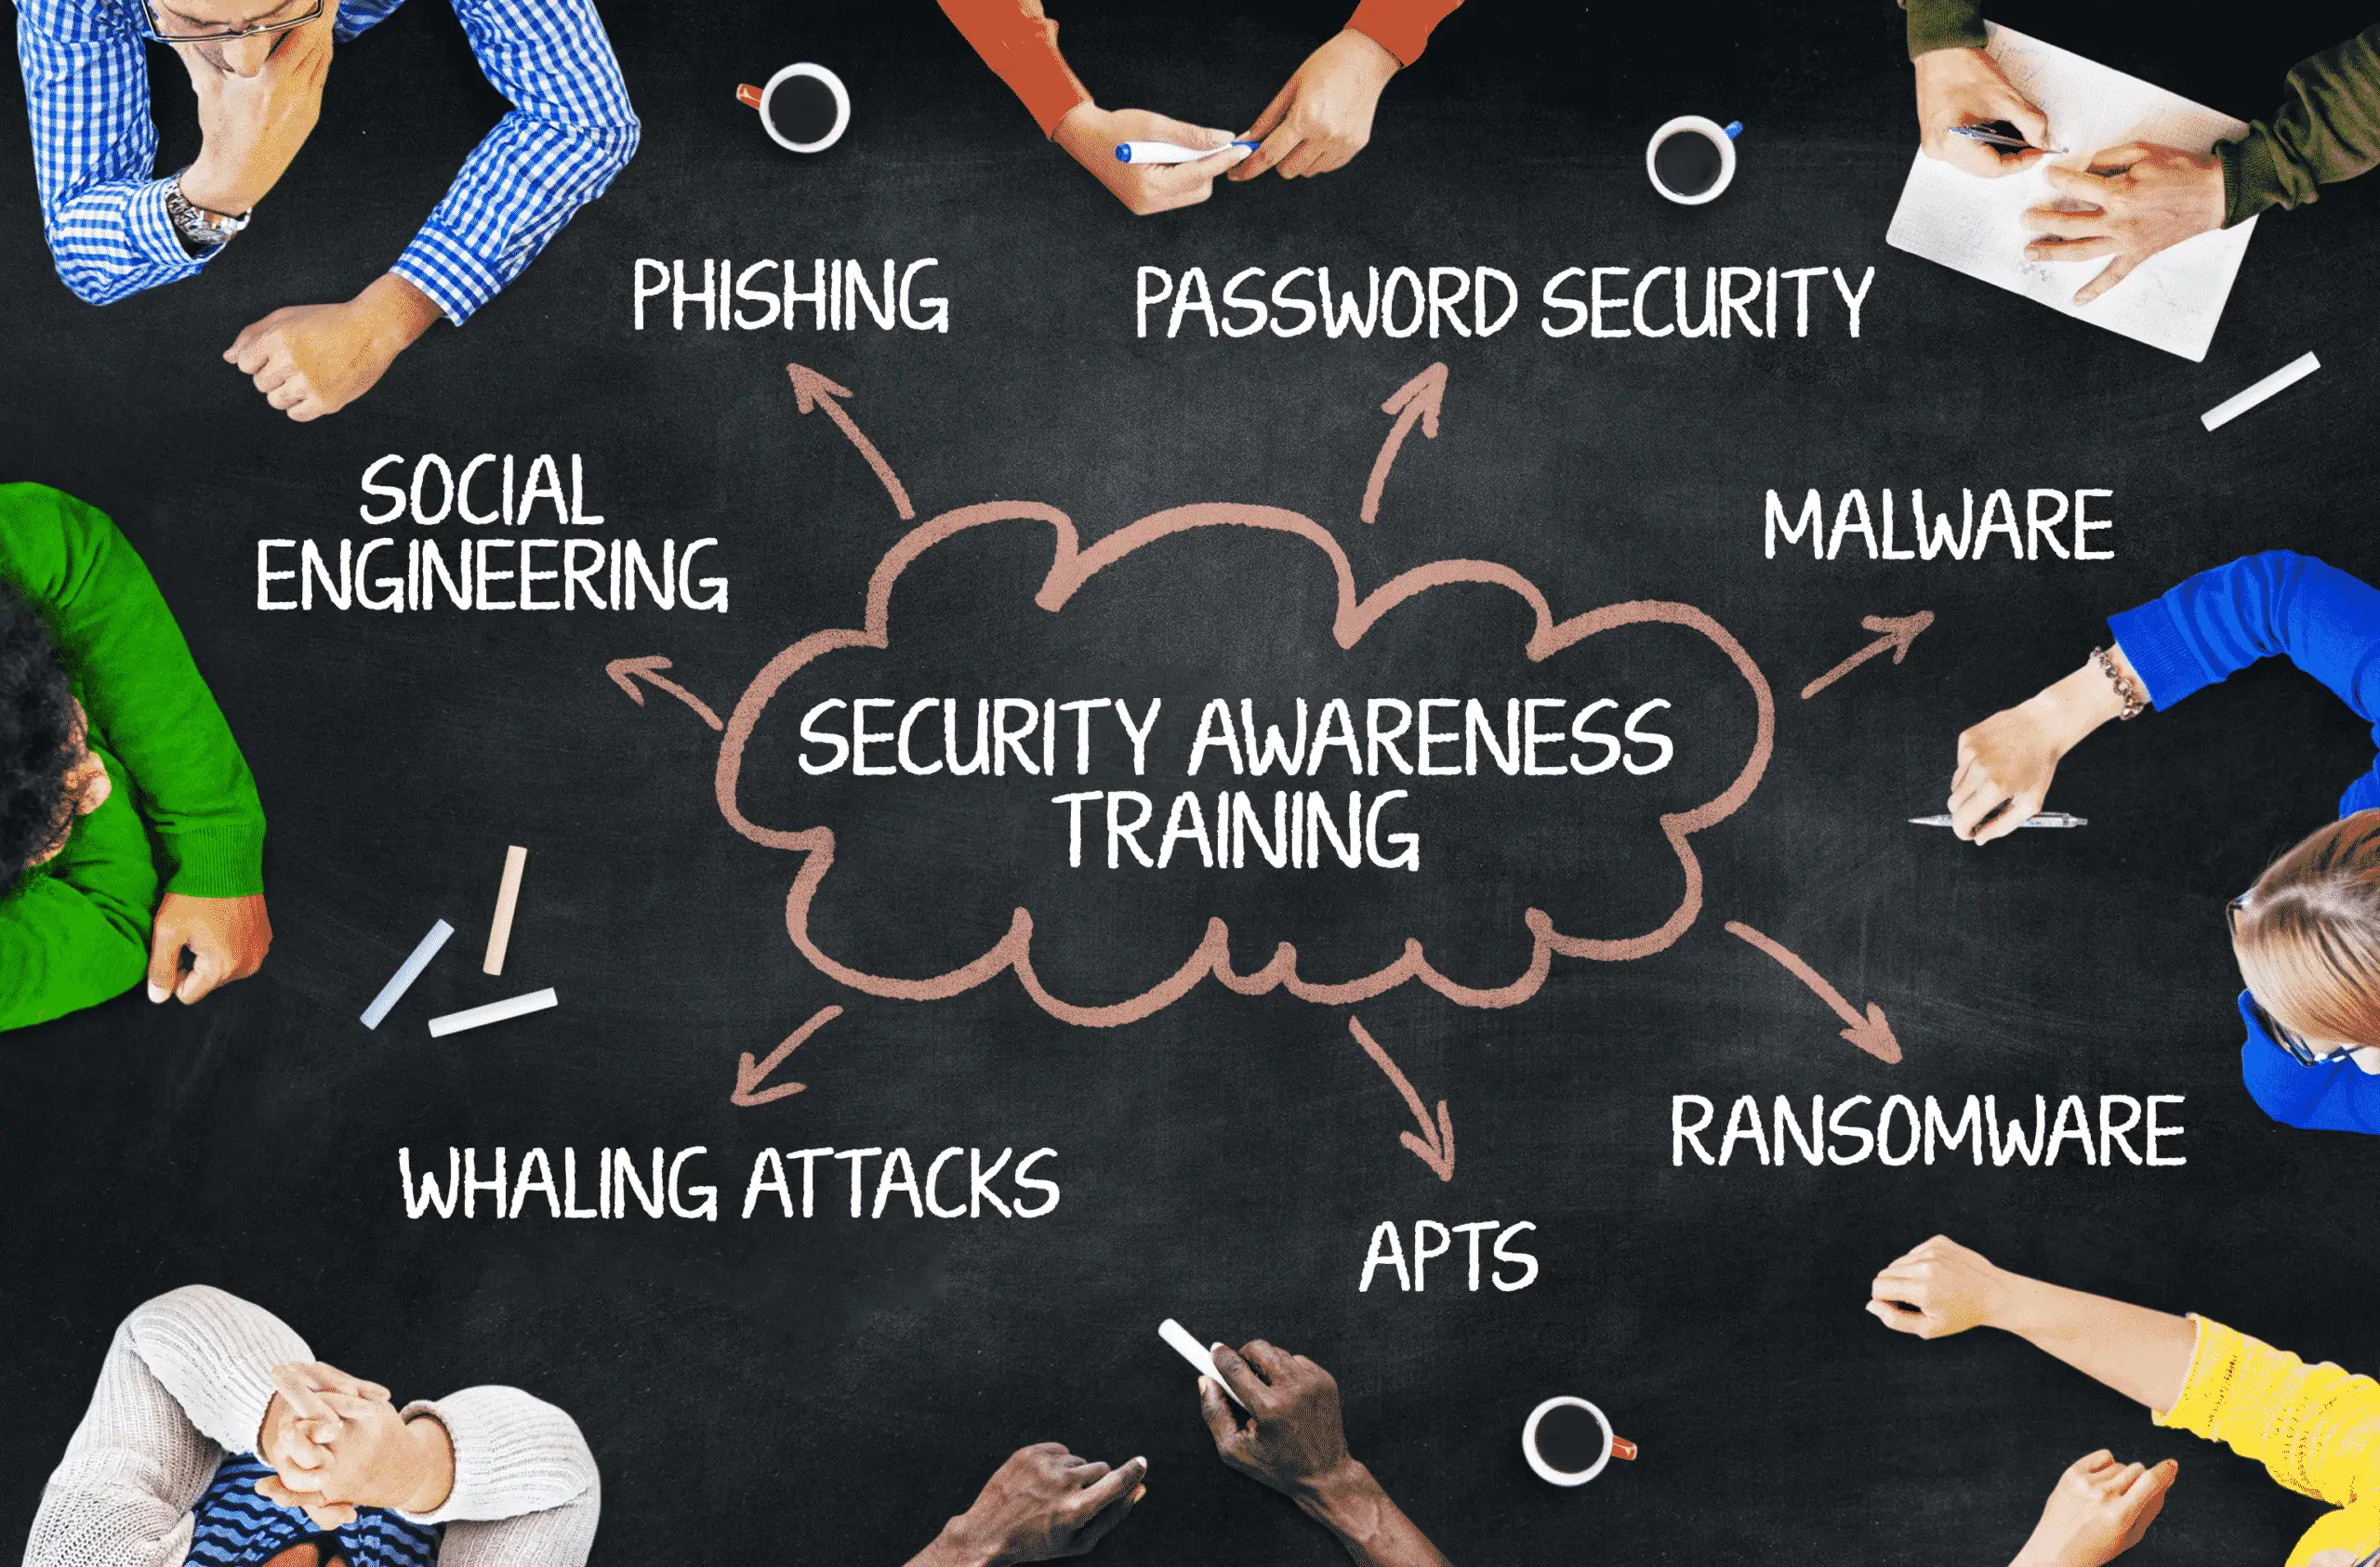 How to build a successful security awareness programme?